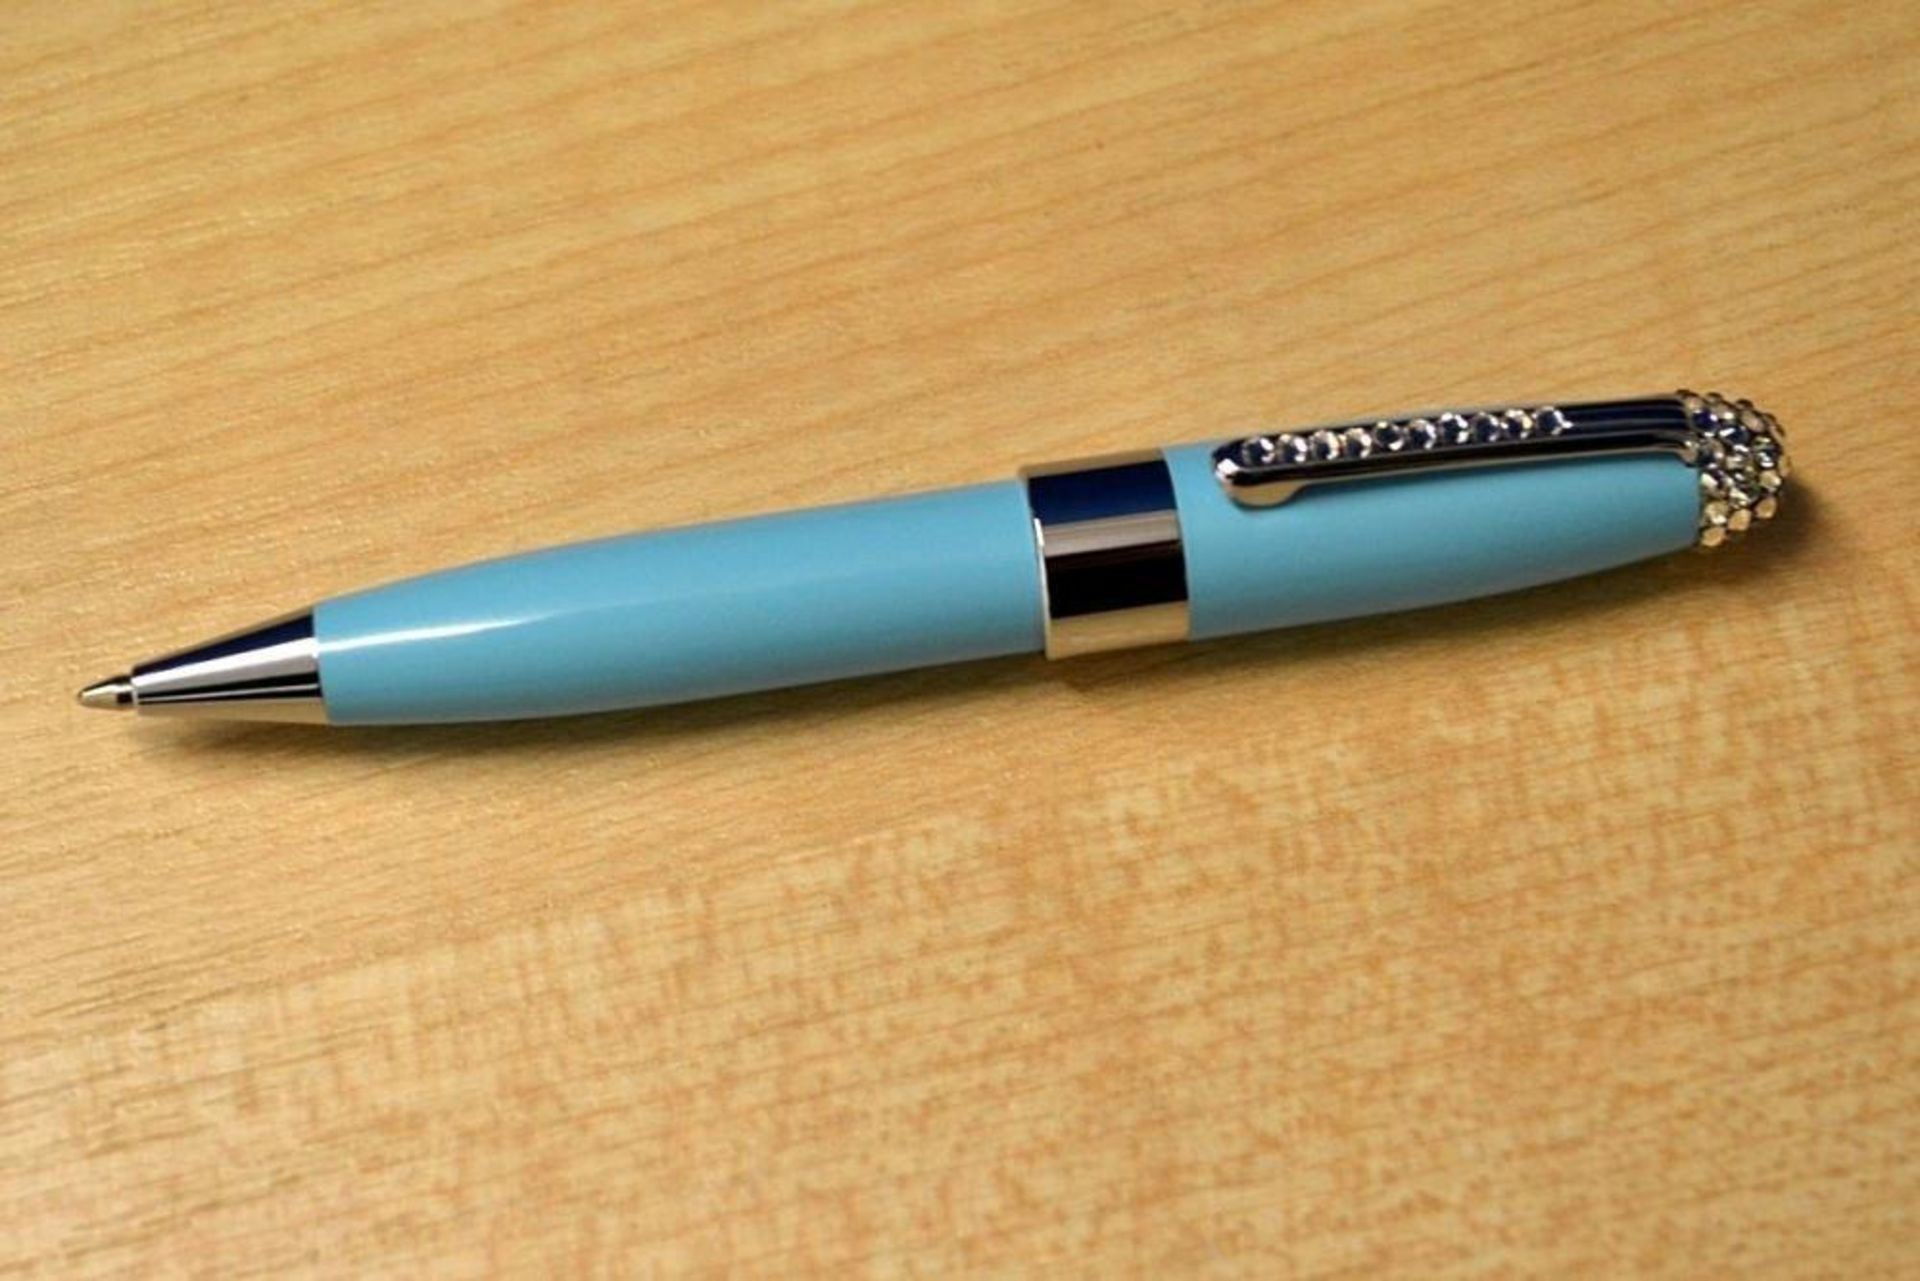 1 x ICE LONDON "Duchess" Ladies Pen Embellished With SWAROVSKI Crystals - Colour: Light Blue - Brand - Image 3 of 3